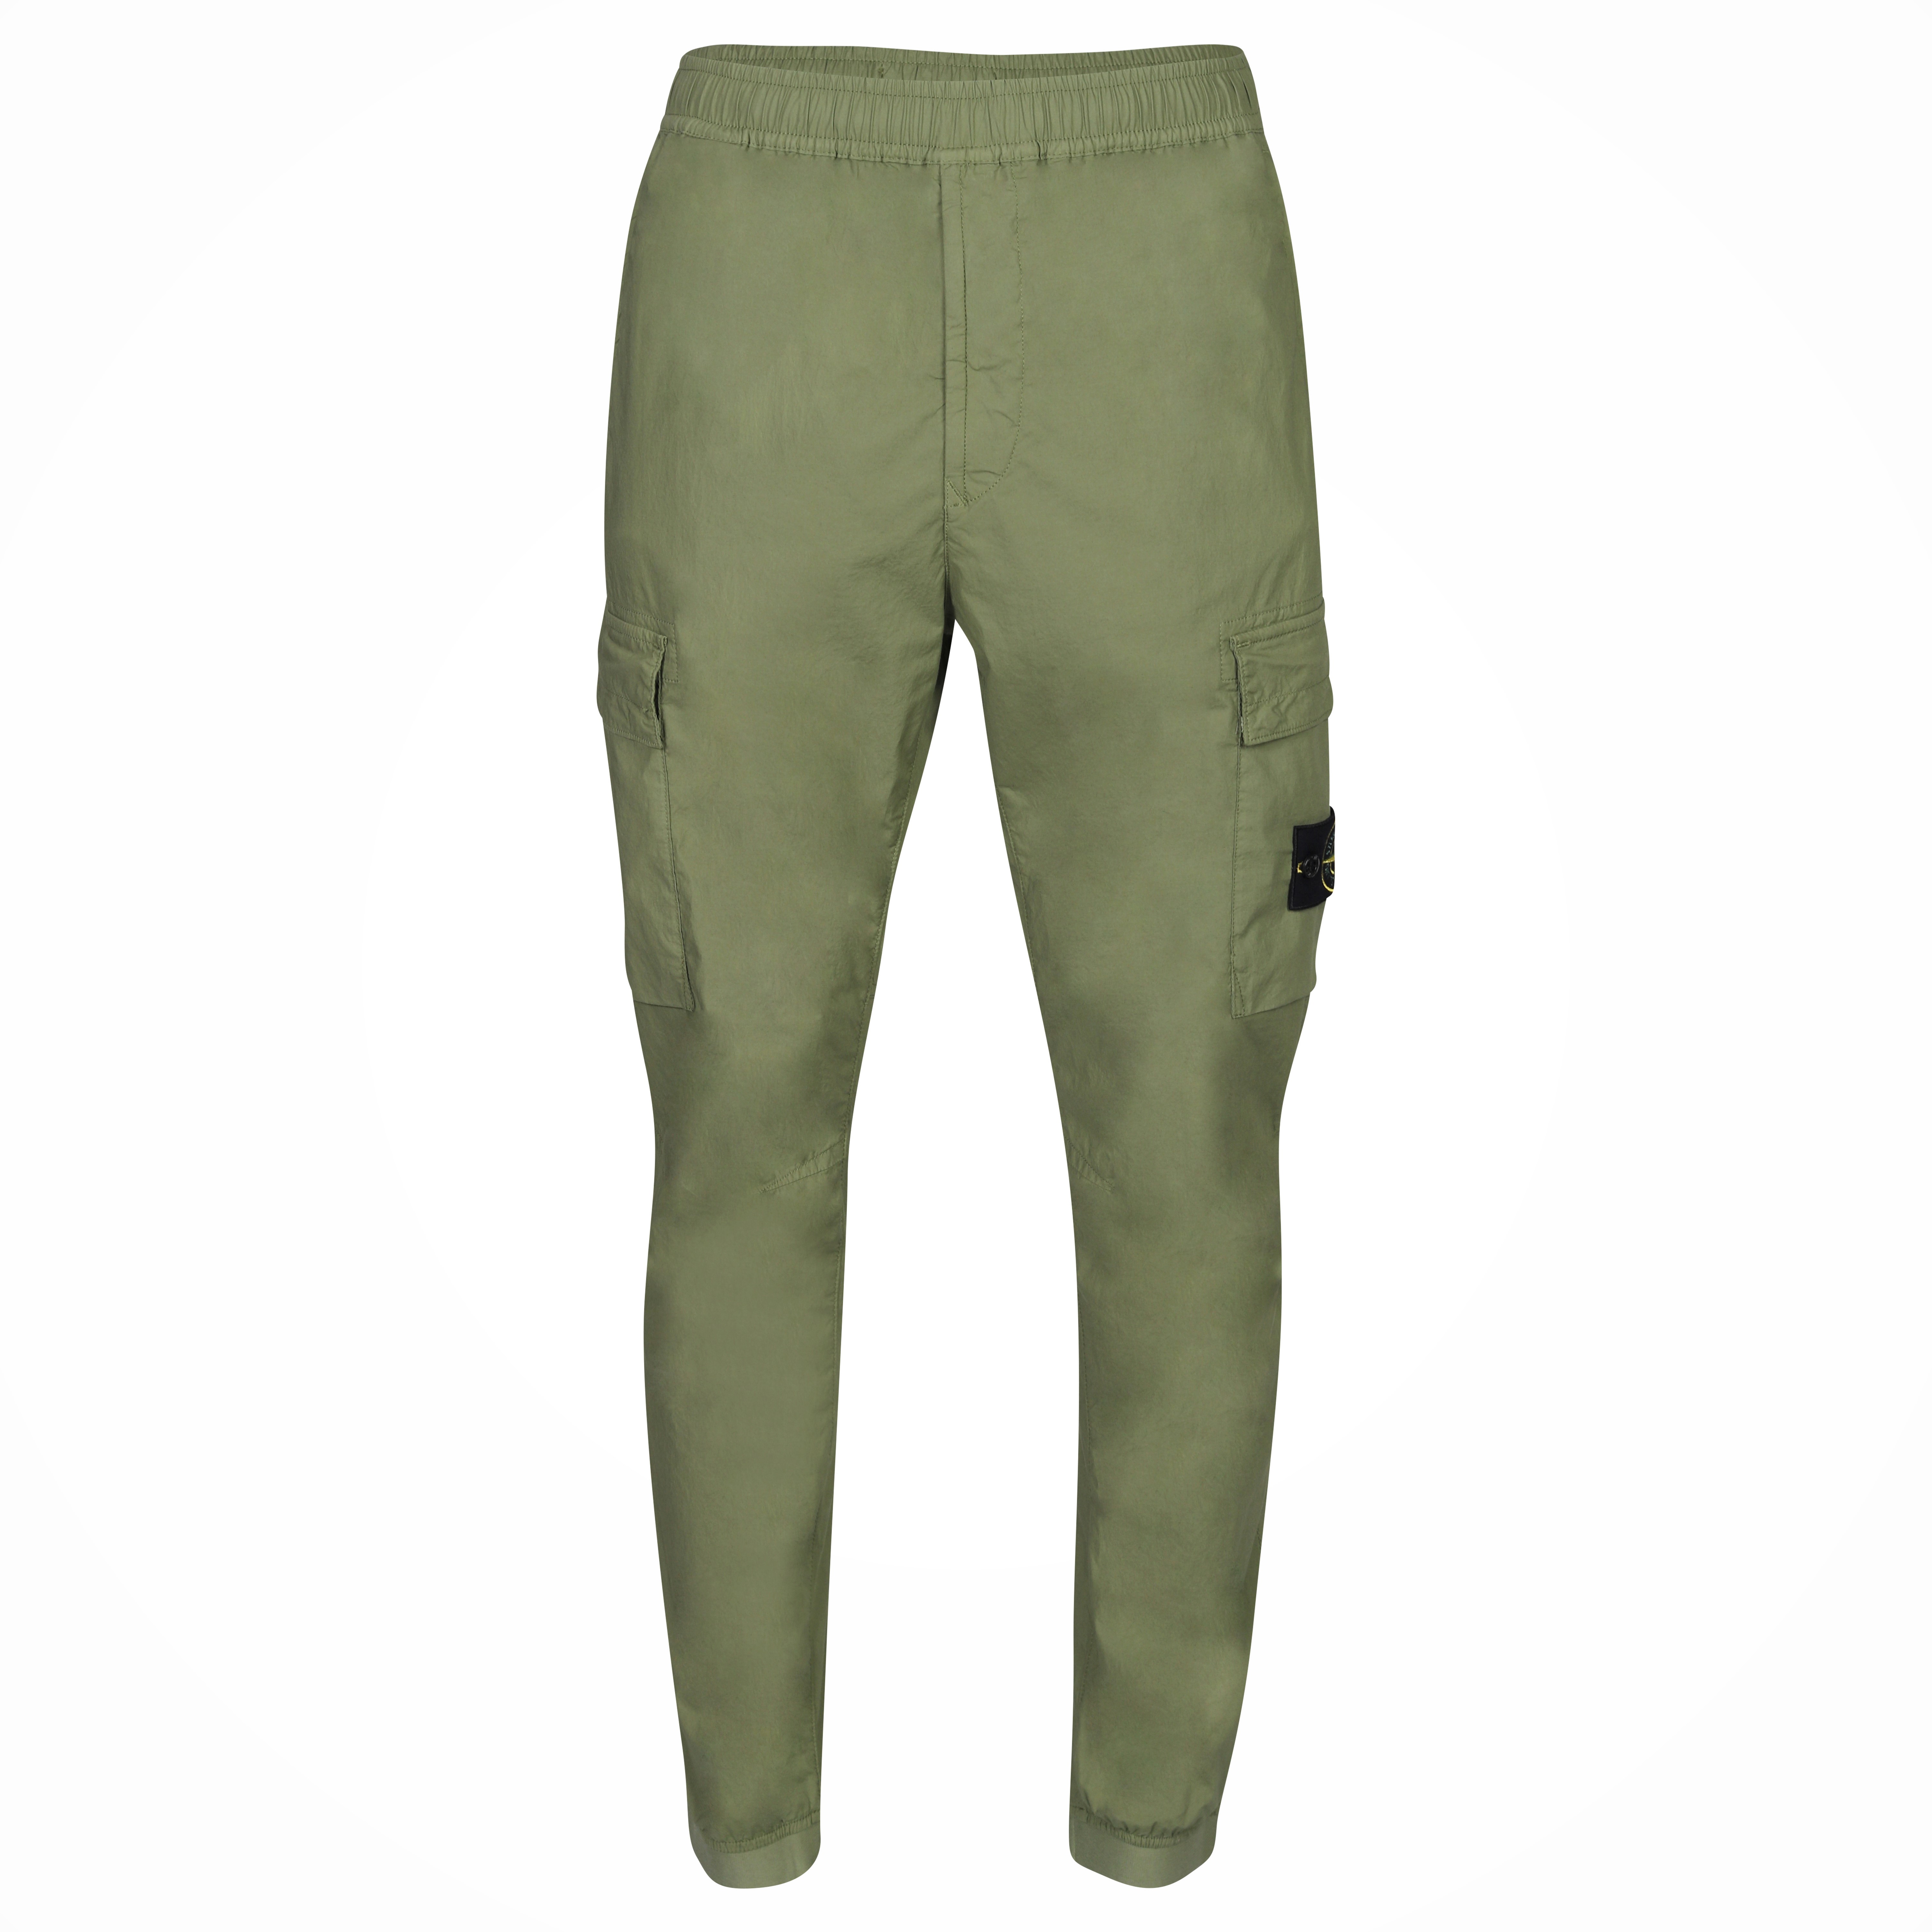 Stone Island Light Cargo Pant in Olive 32